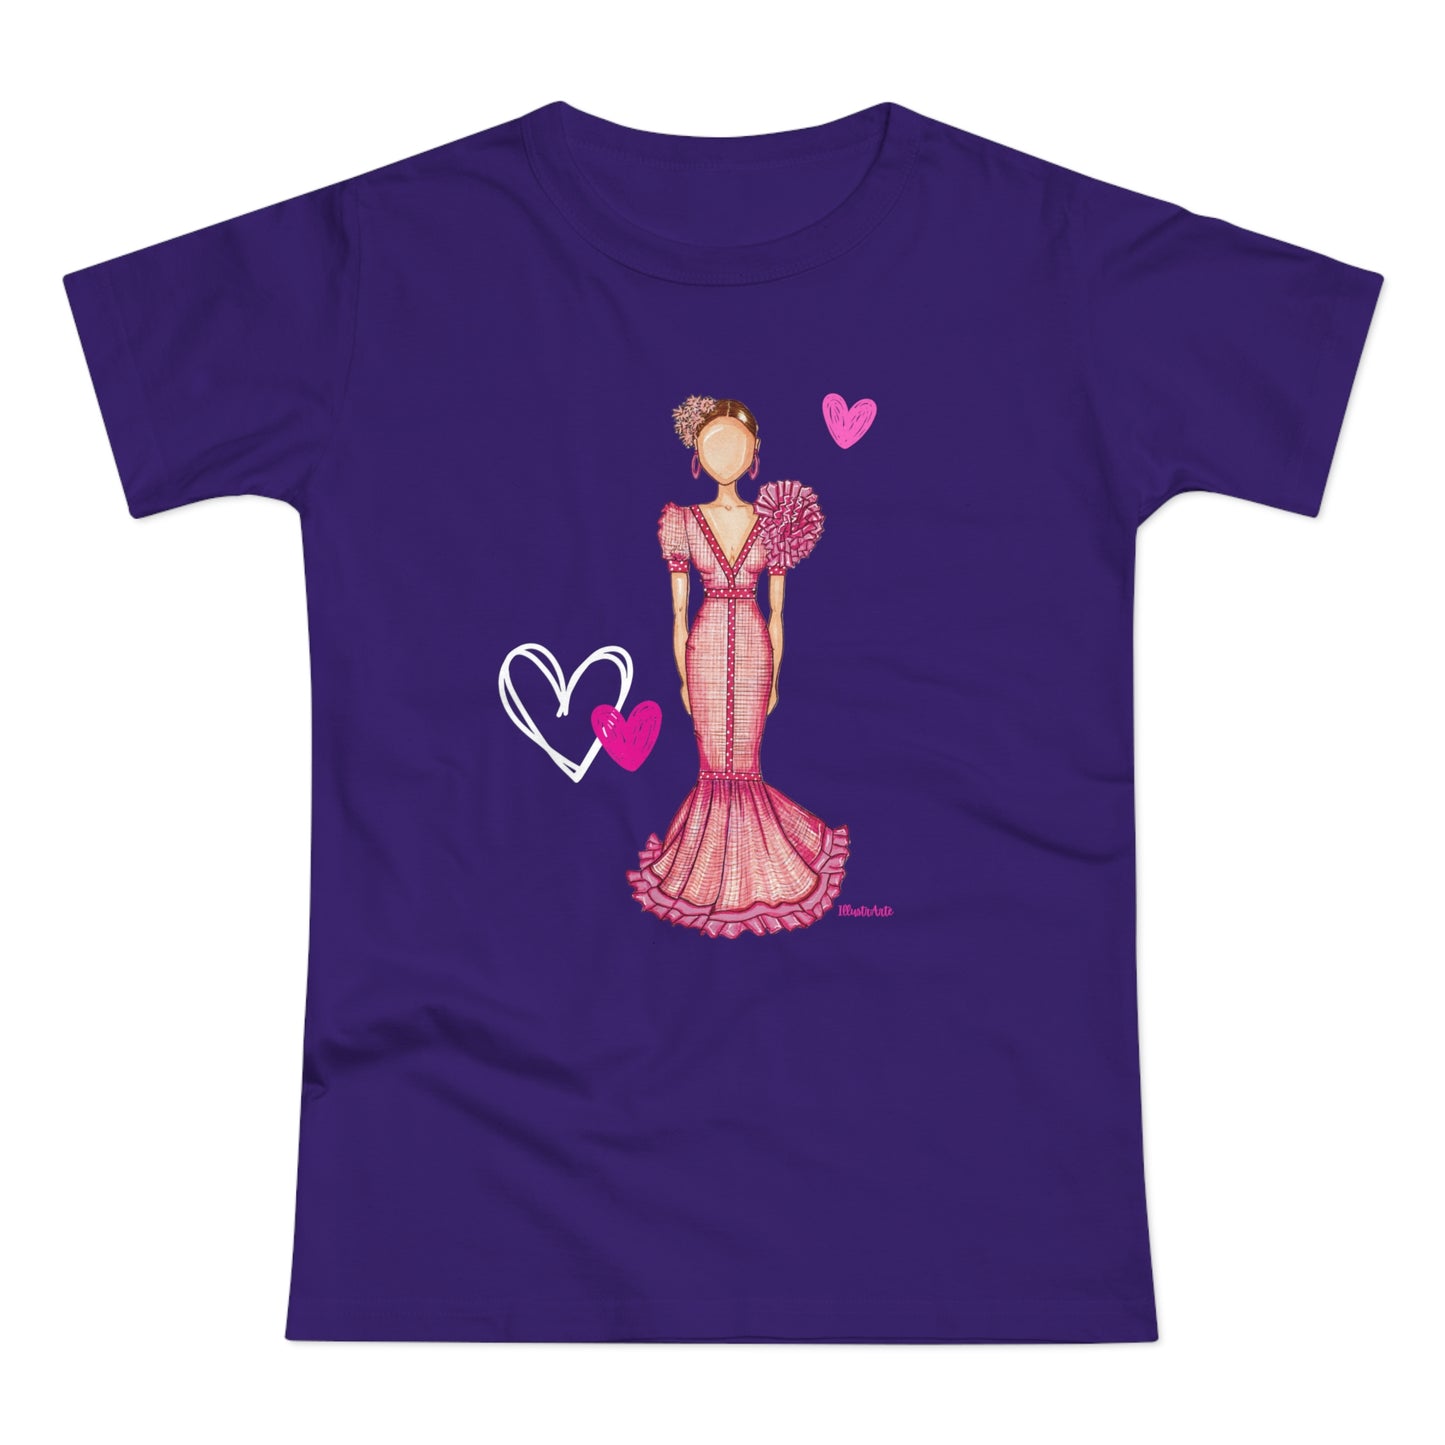 a purple t - shirt with a woman in a dress and hearts